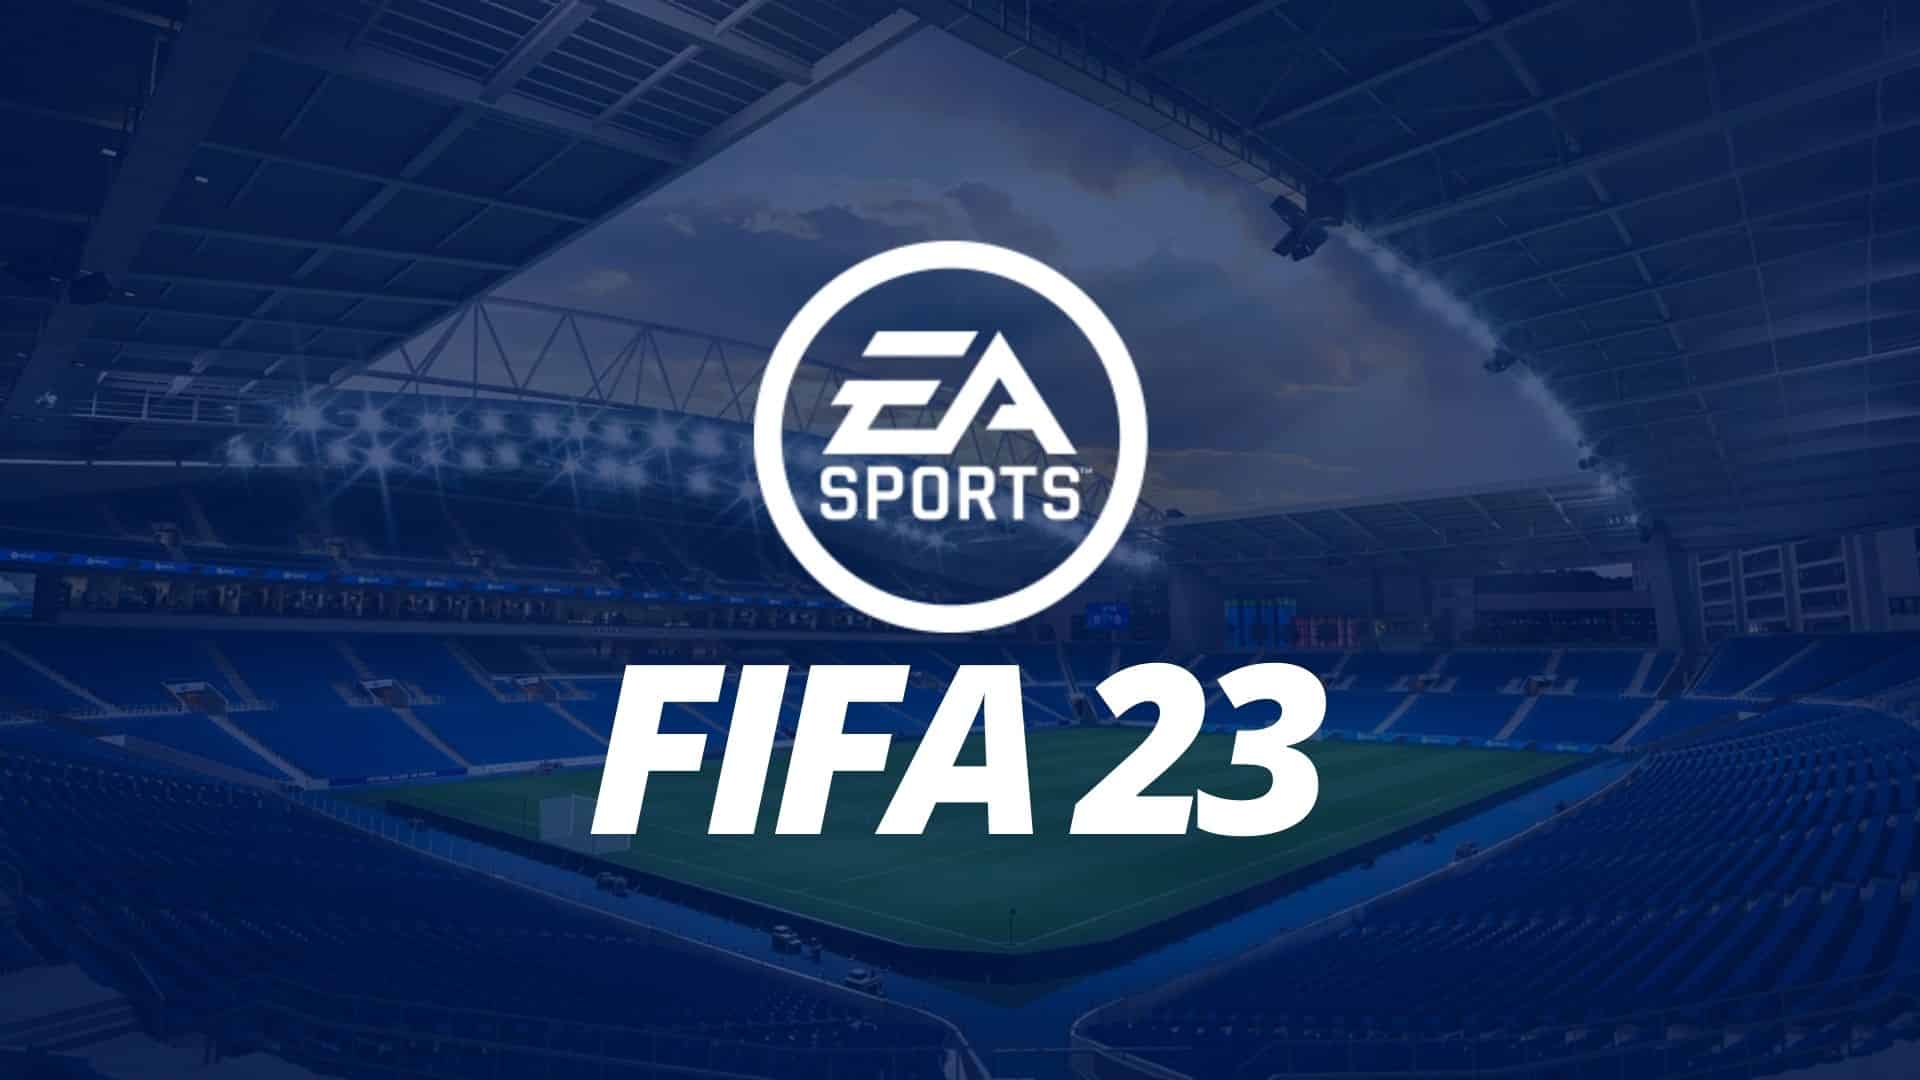 FIFA 23 ULTIMATE TEAM 2800 POINTS PC